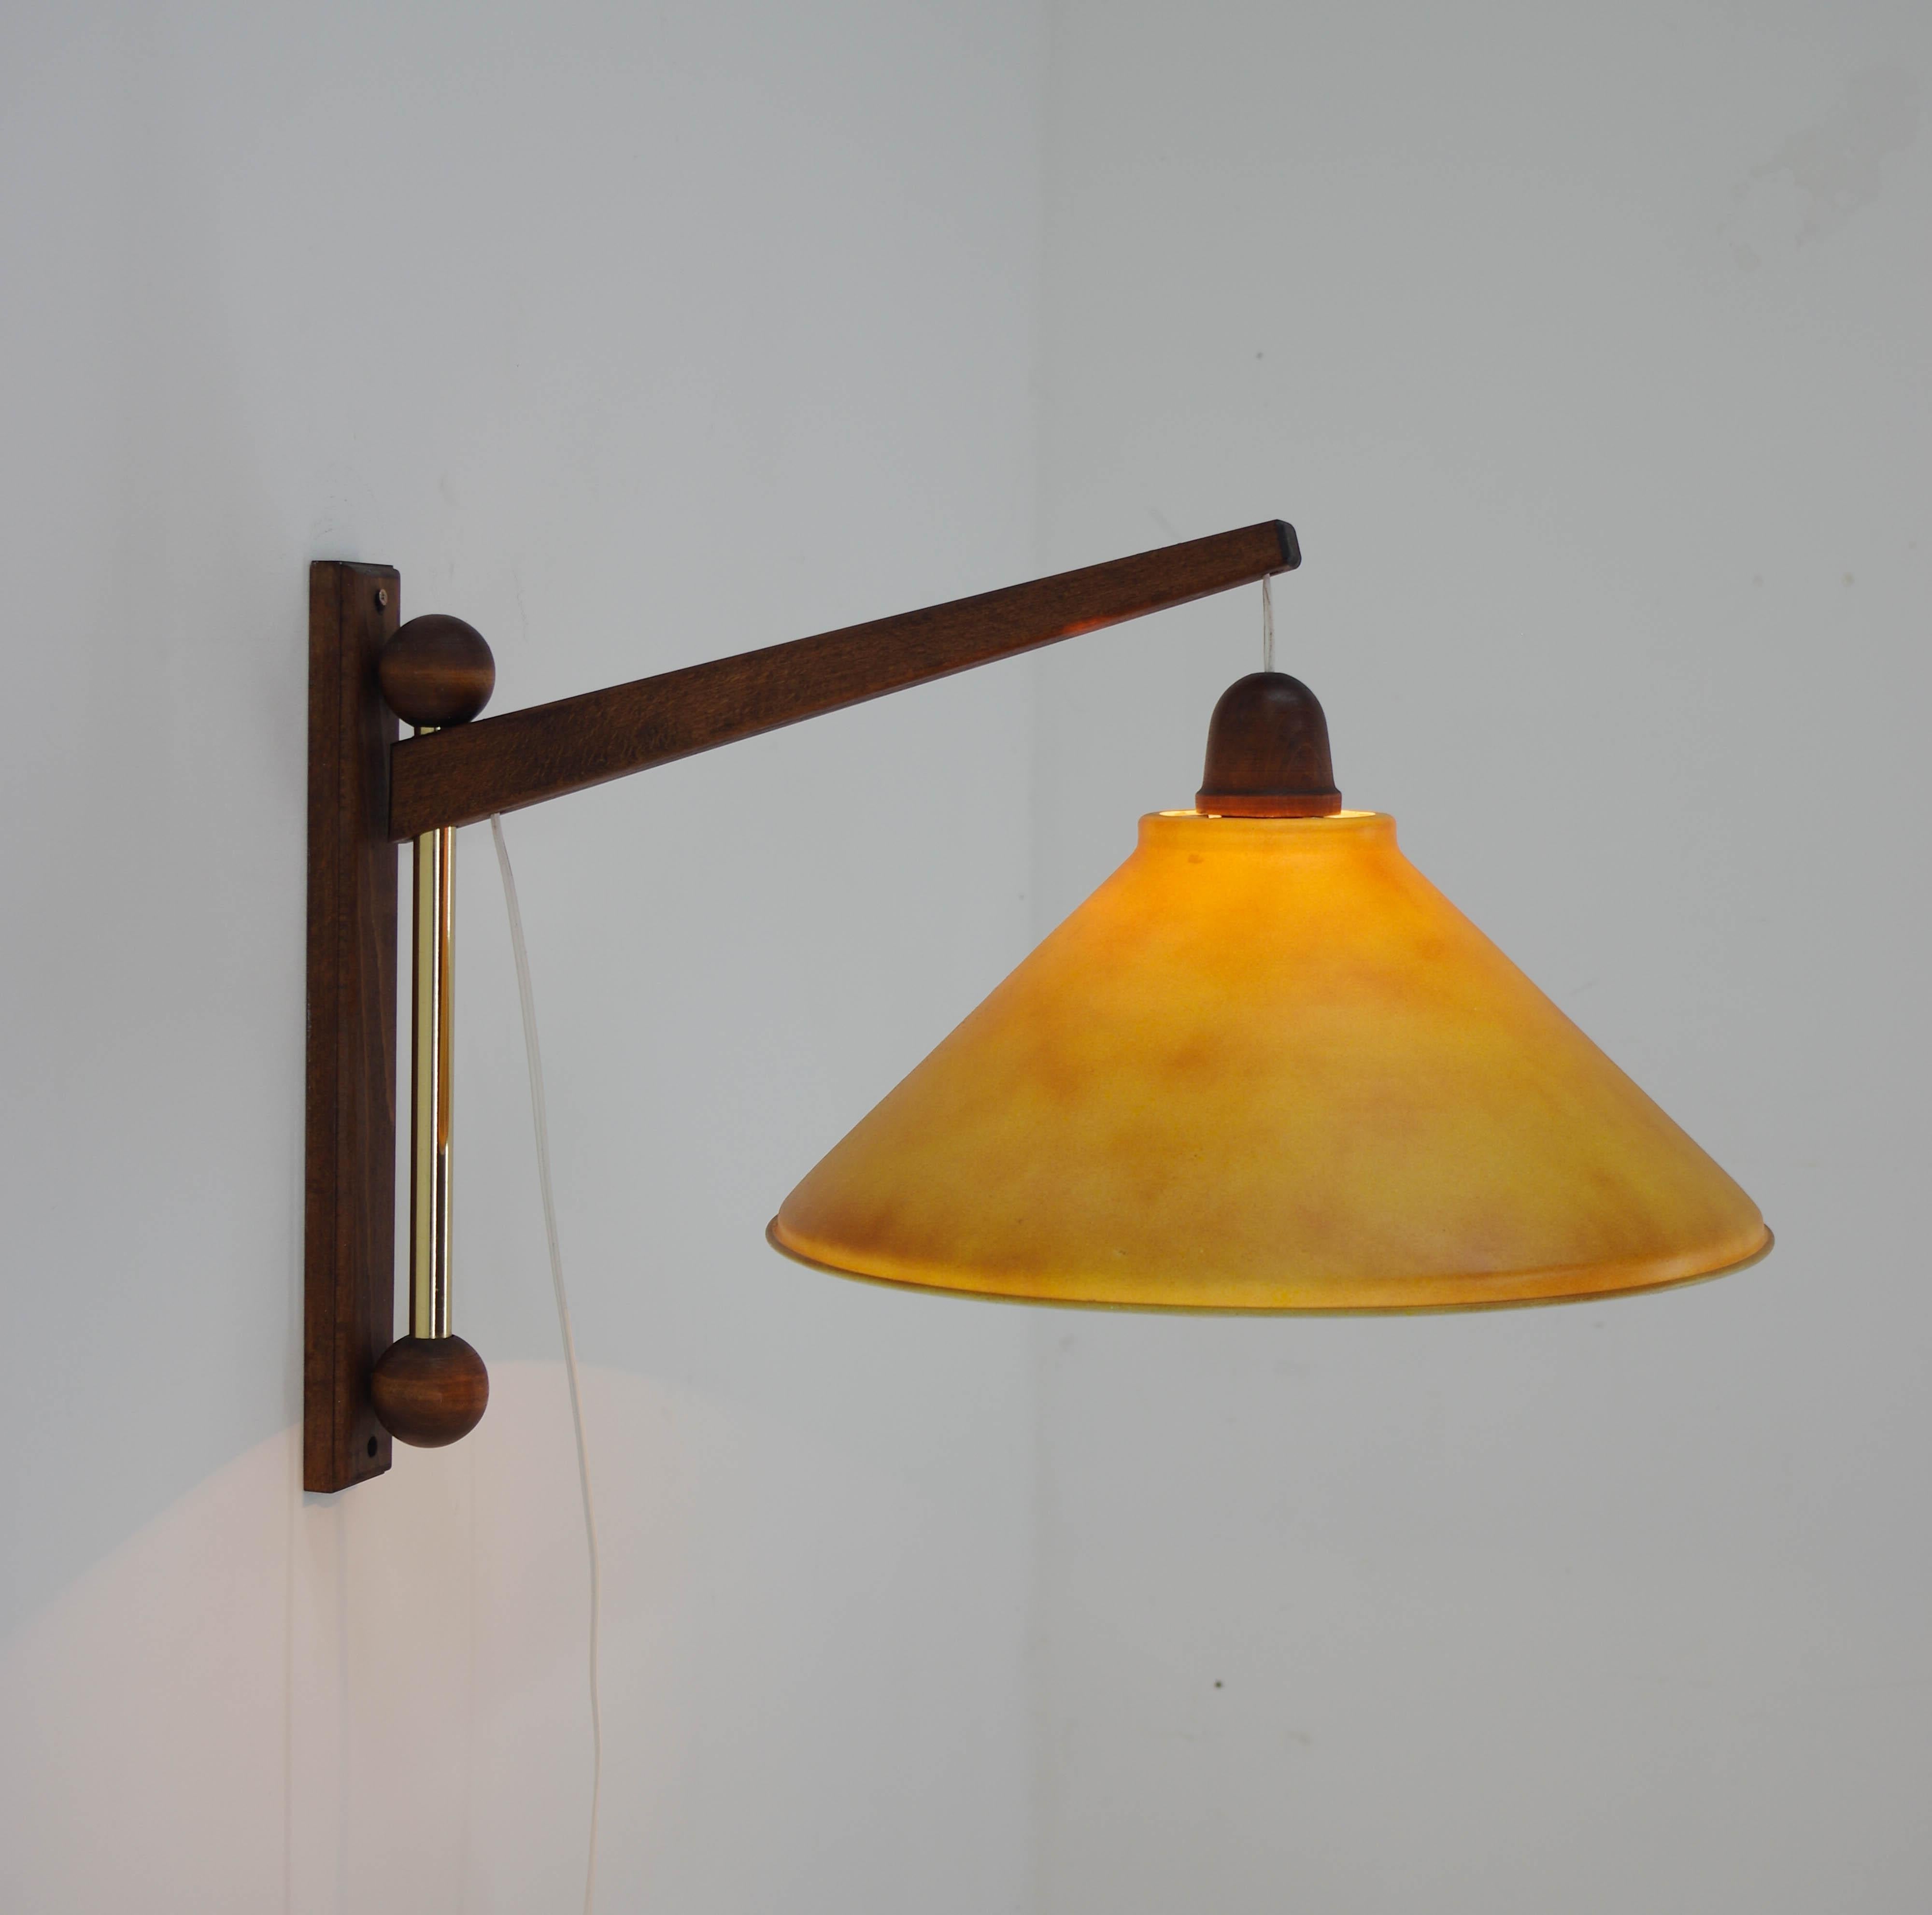 Made in Czech Republic in 1980s.
Adjustable height and rotating plastic shade
1x60W, E25-E27 bulb
US plug adapter included